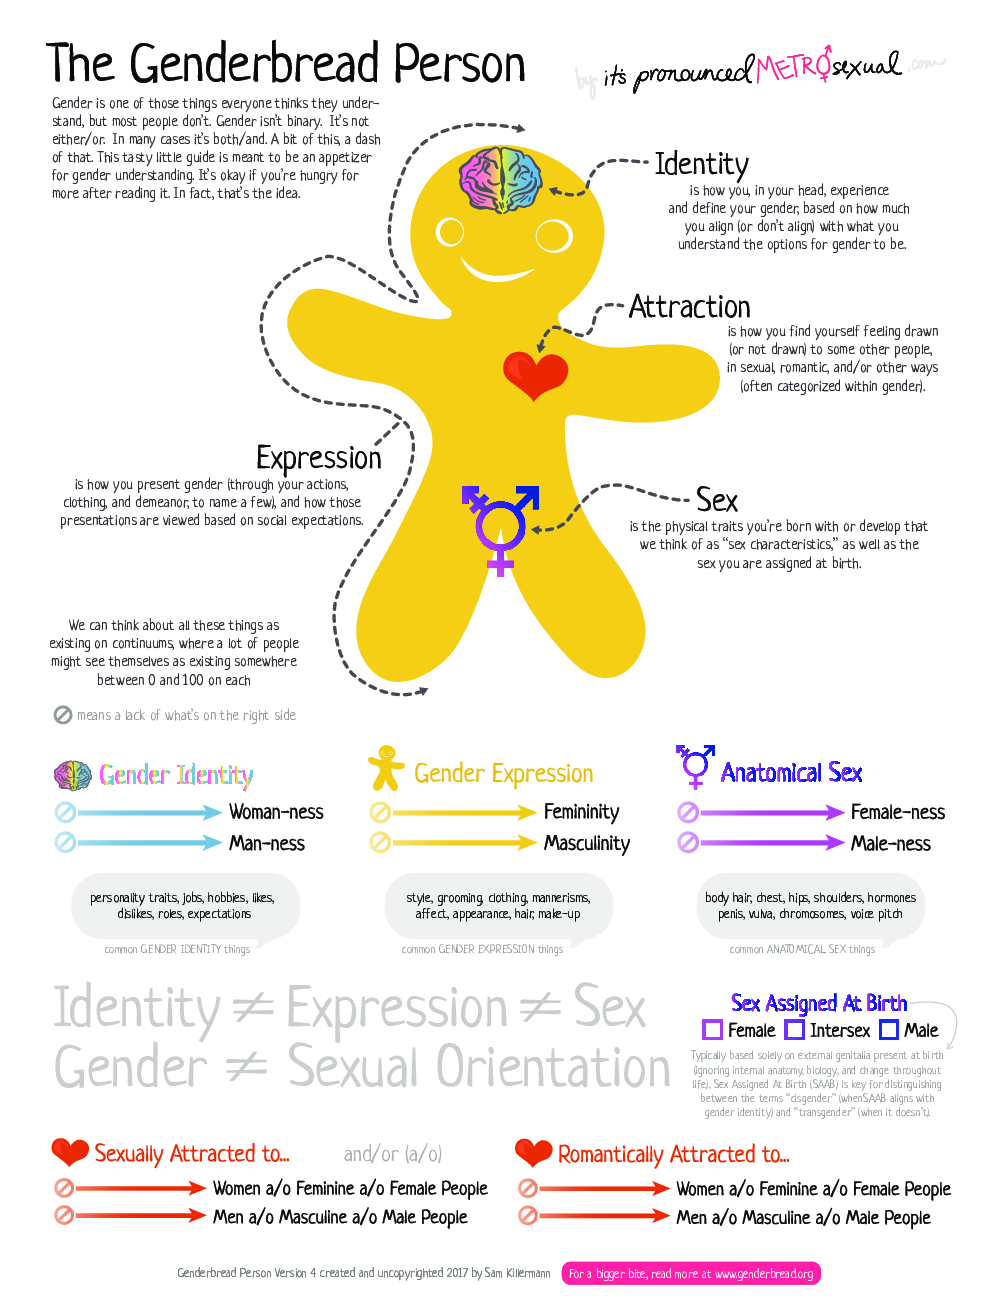 A picture of a gingerbread person with a brain marked identity,
a heart marked attraction, a body outline marked expression, and a transgender
symbol between the legs marked sex. There are sliding scales from null to
womanness and null to manness for each of these categories below the person.